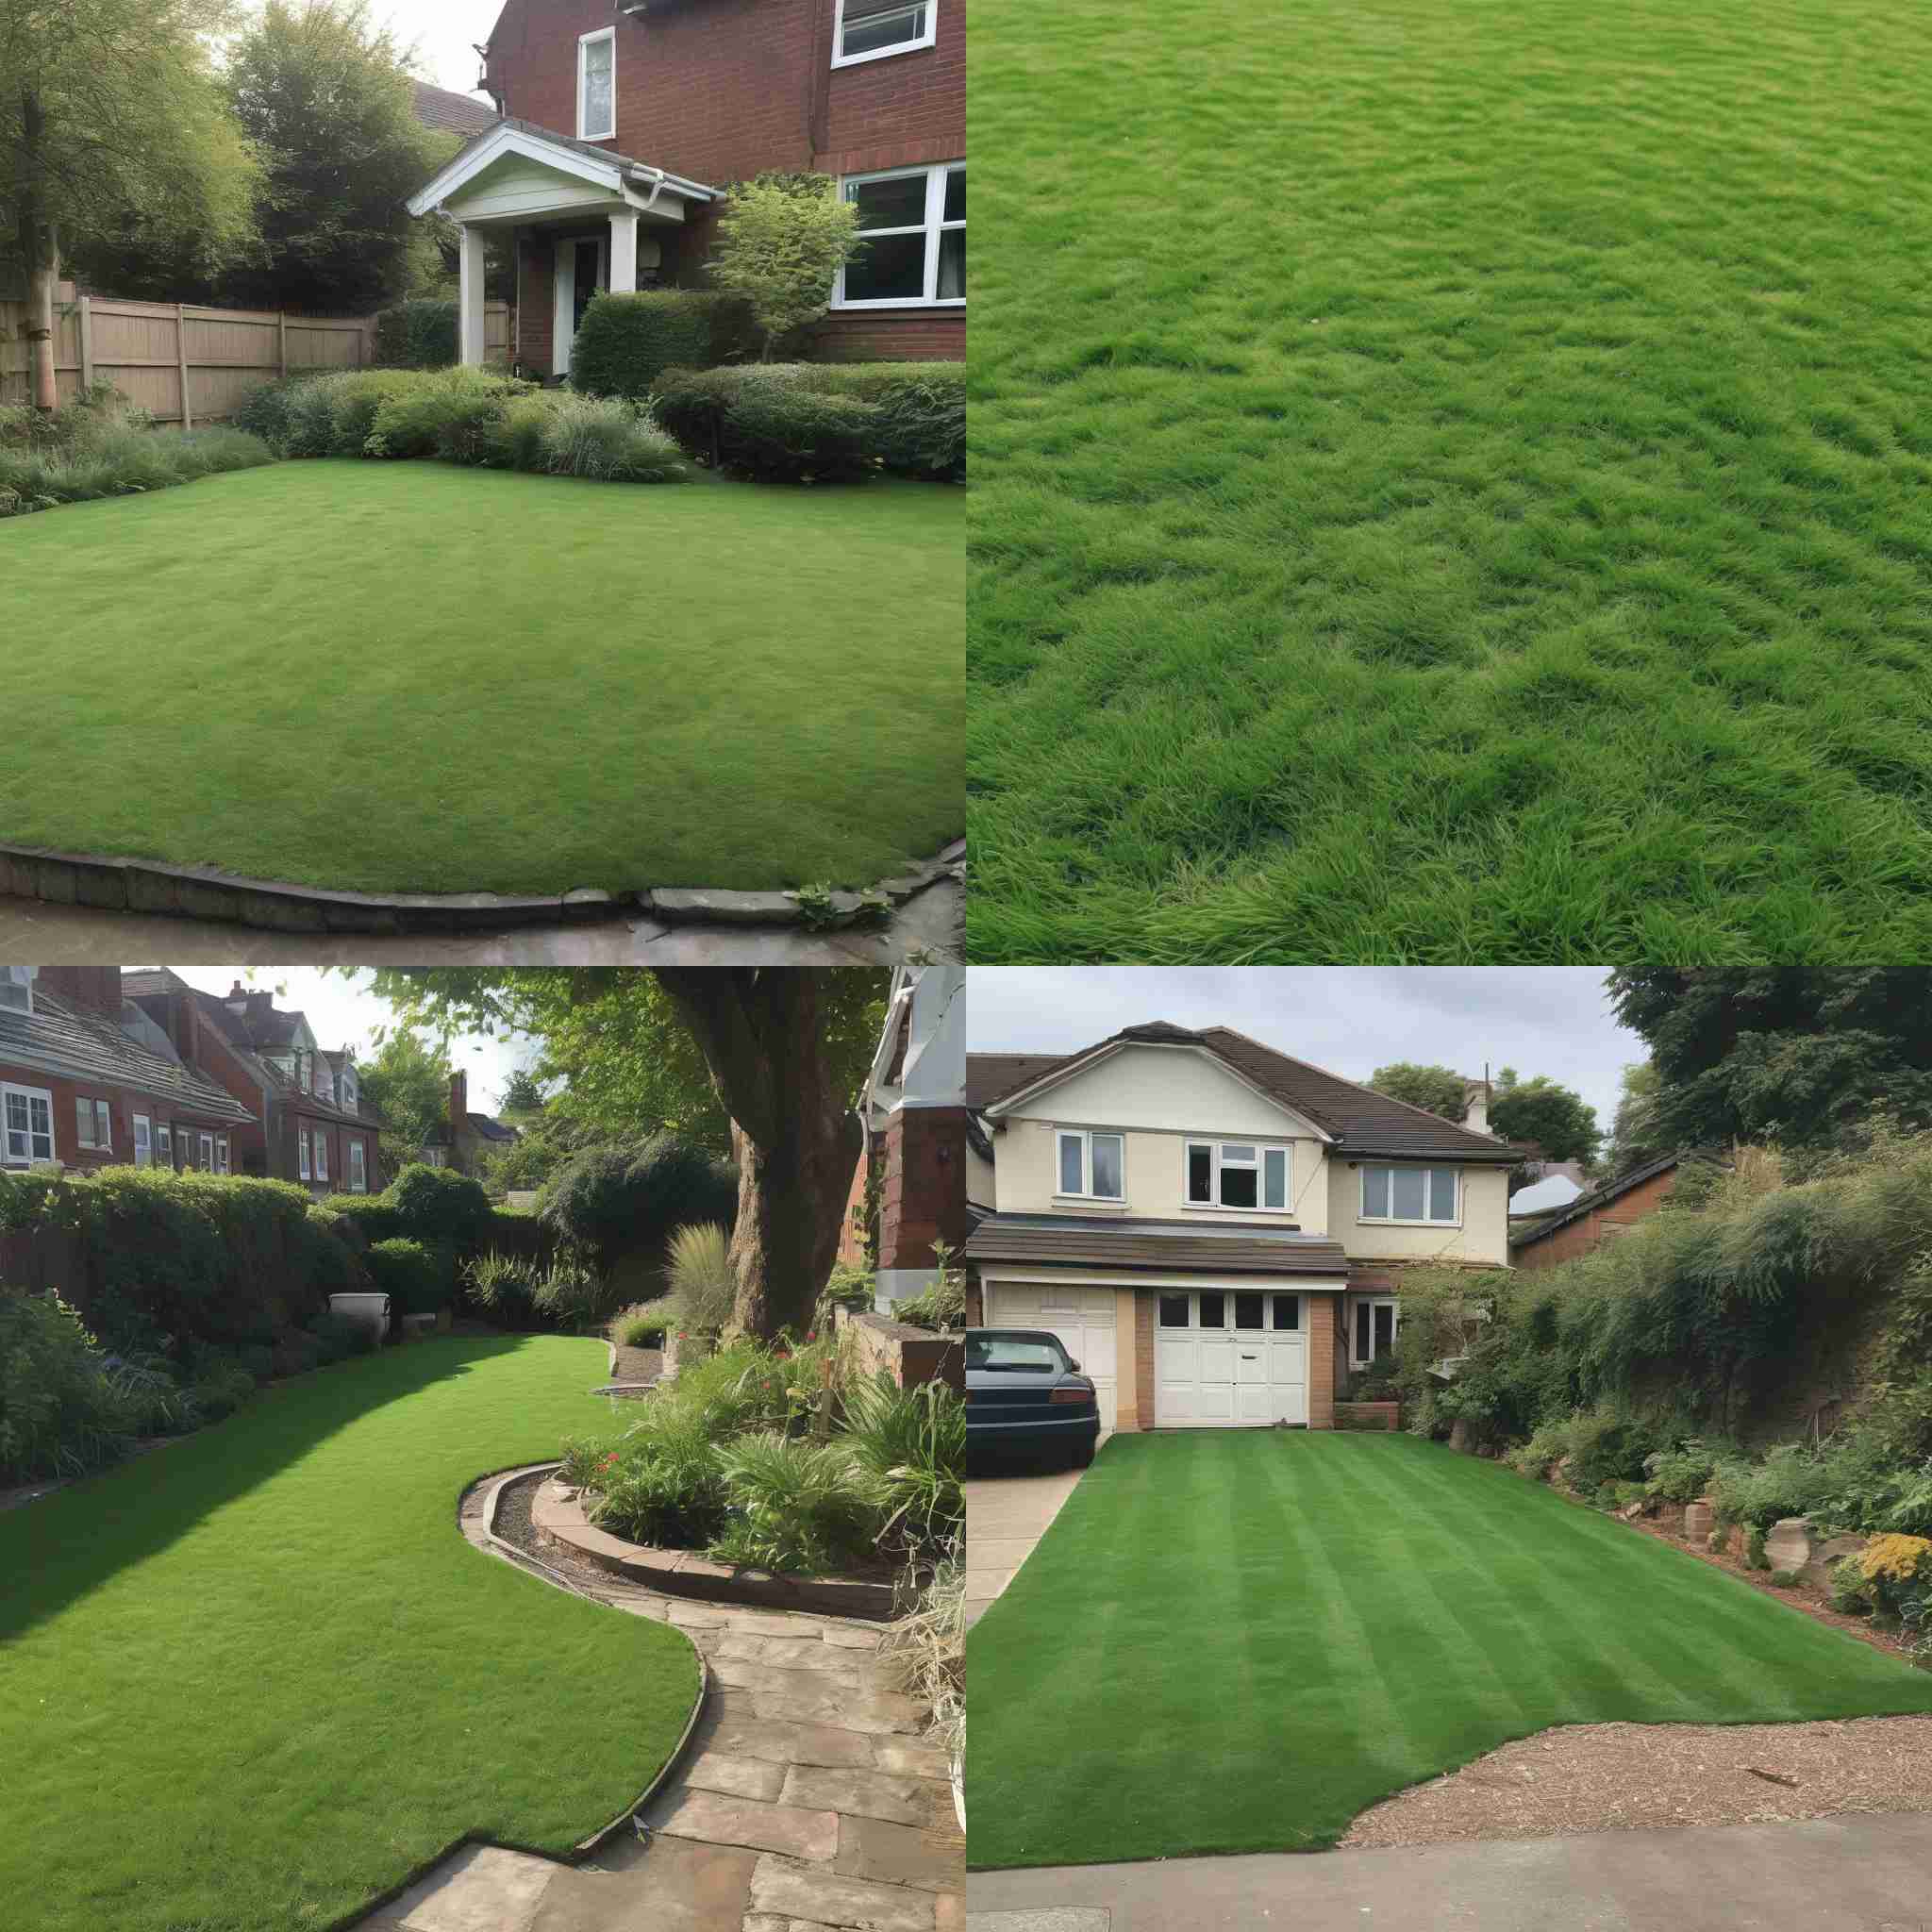 A rarely watered lawn